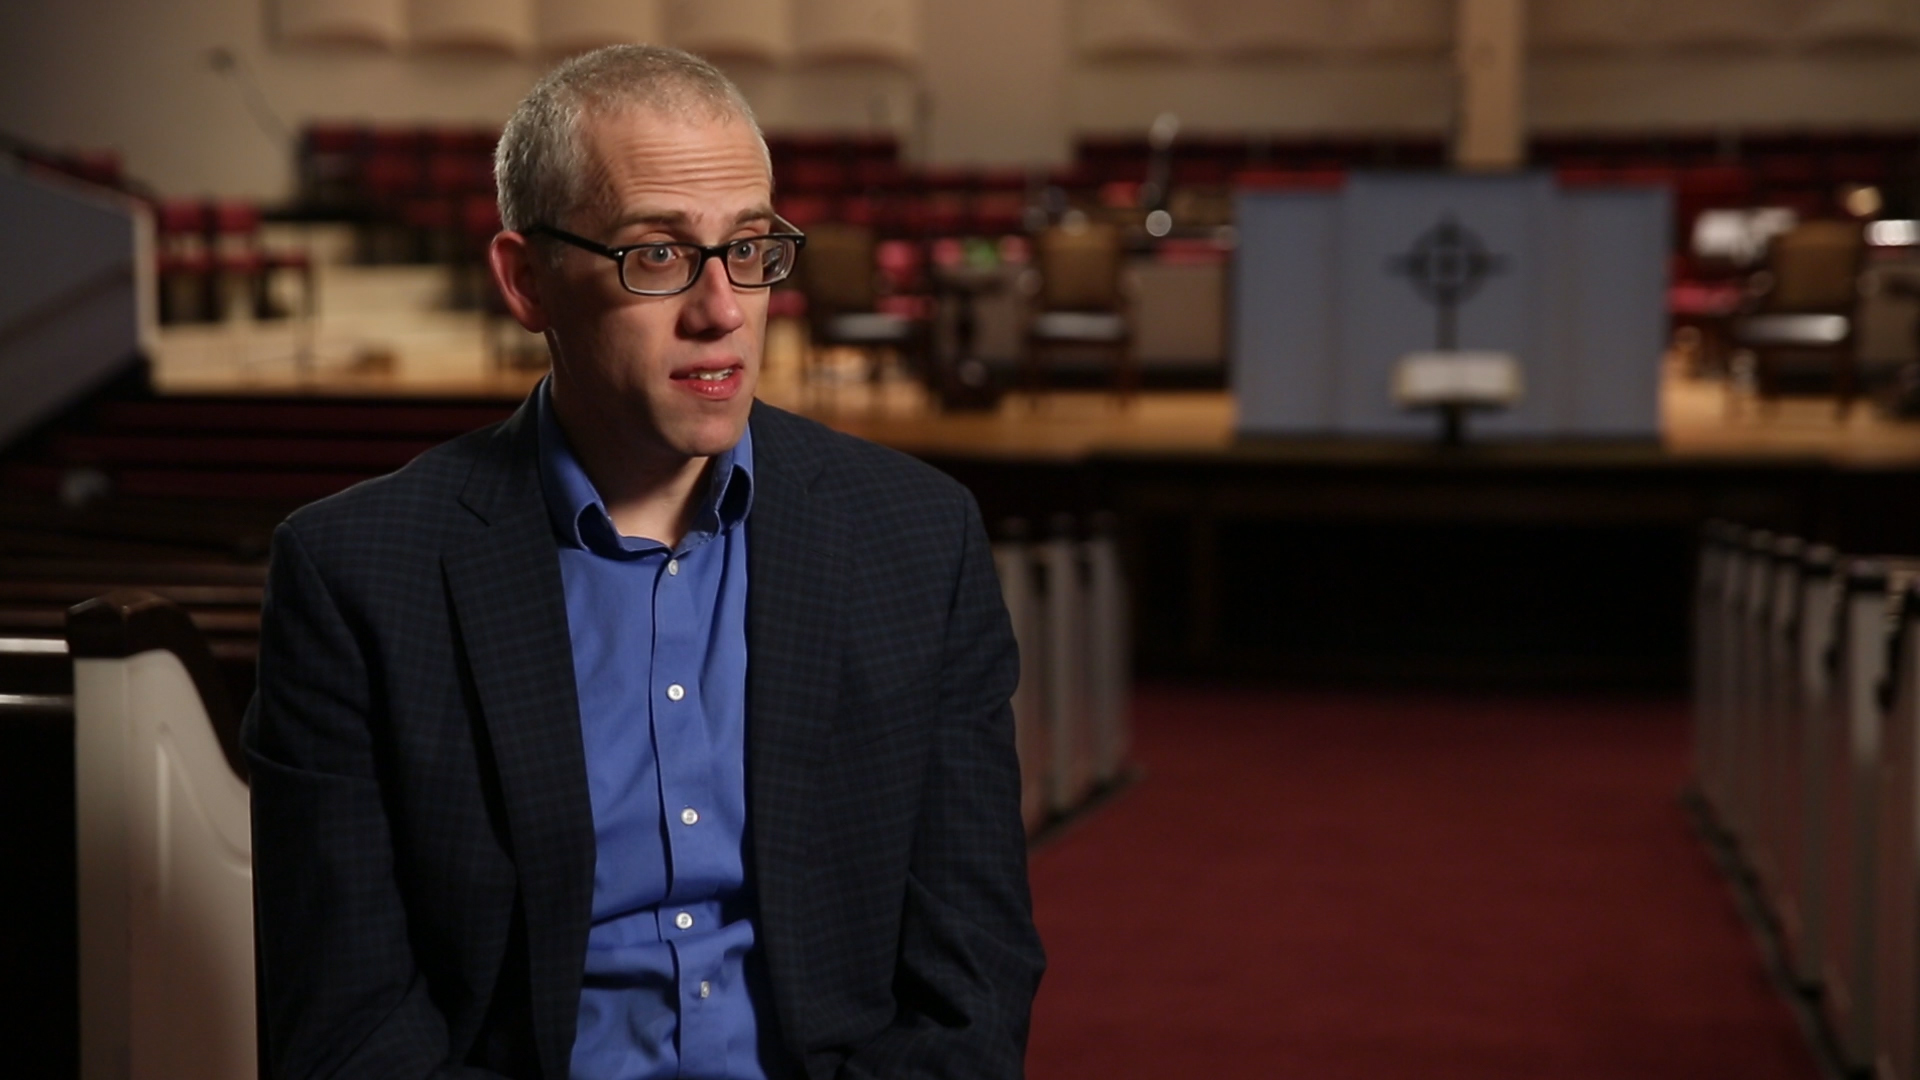 Should LGBTQ People Be Welcomed In Church?